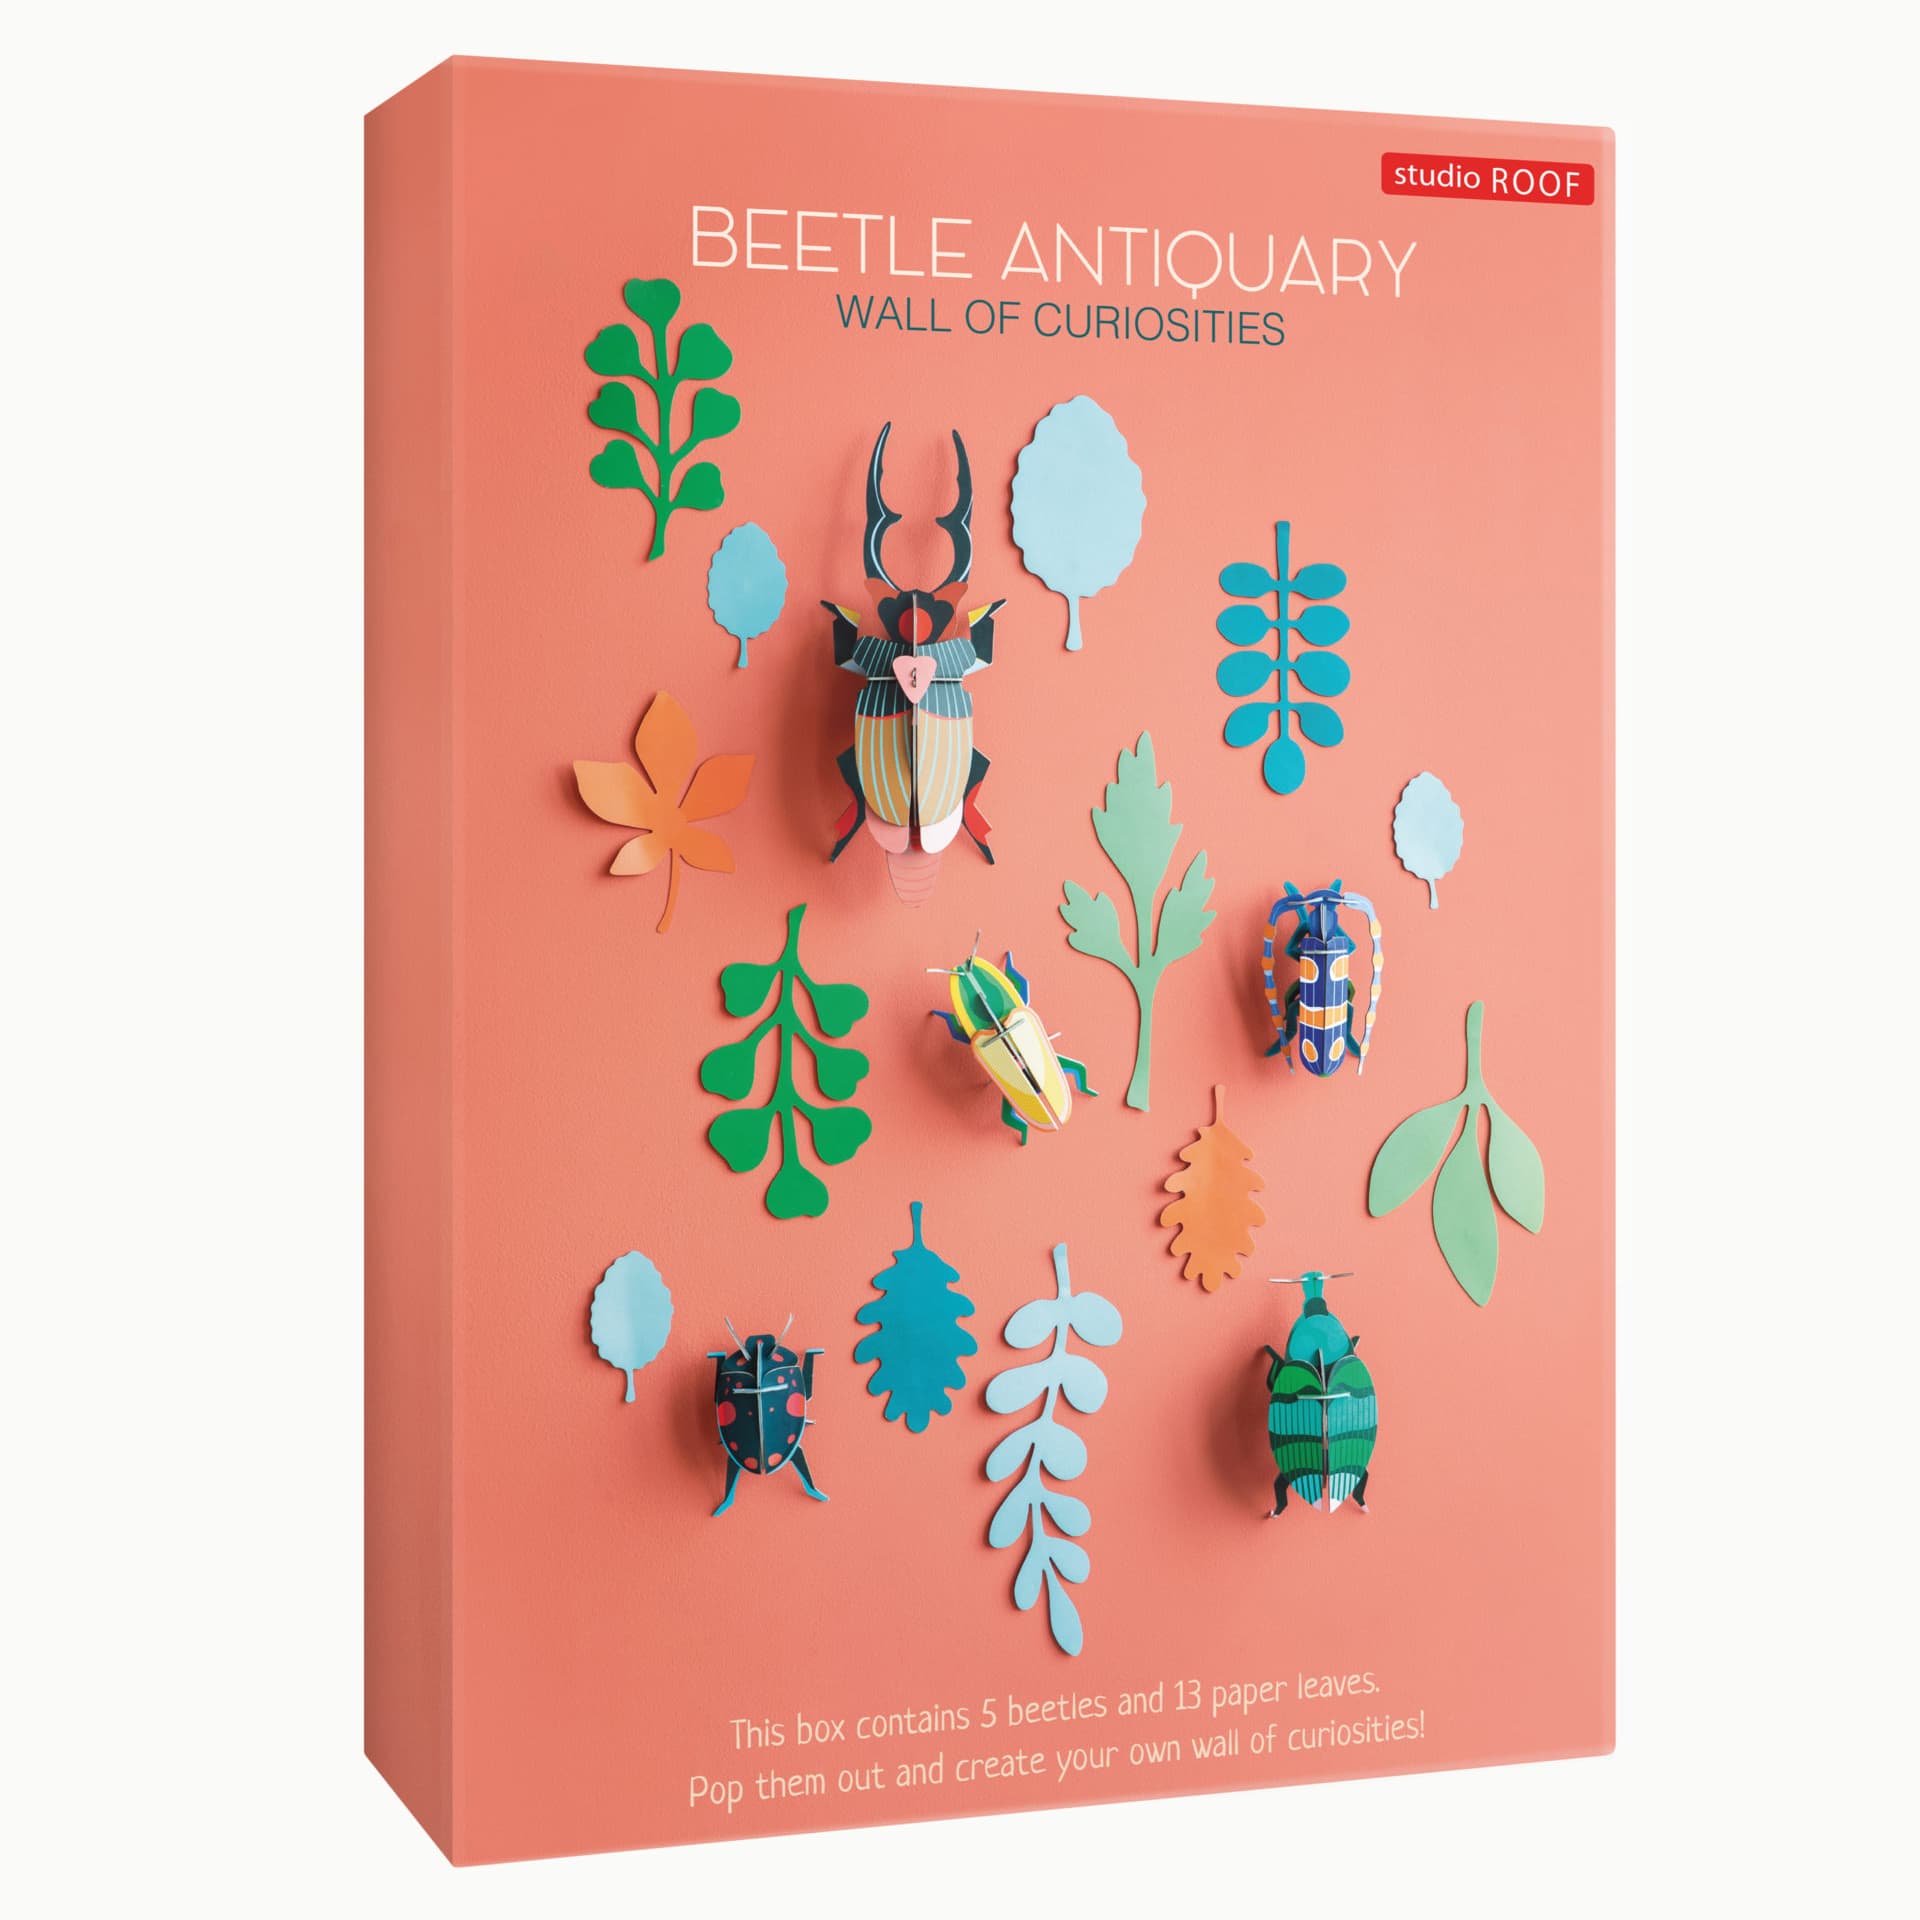 wall hanging for jungle room with colorful beetles